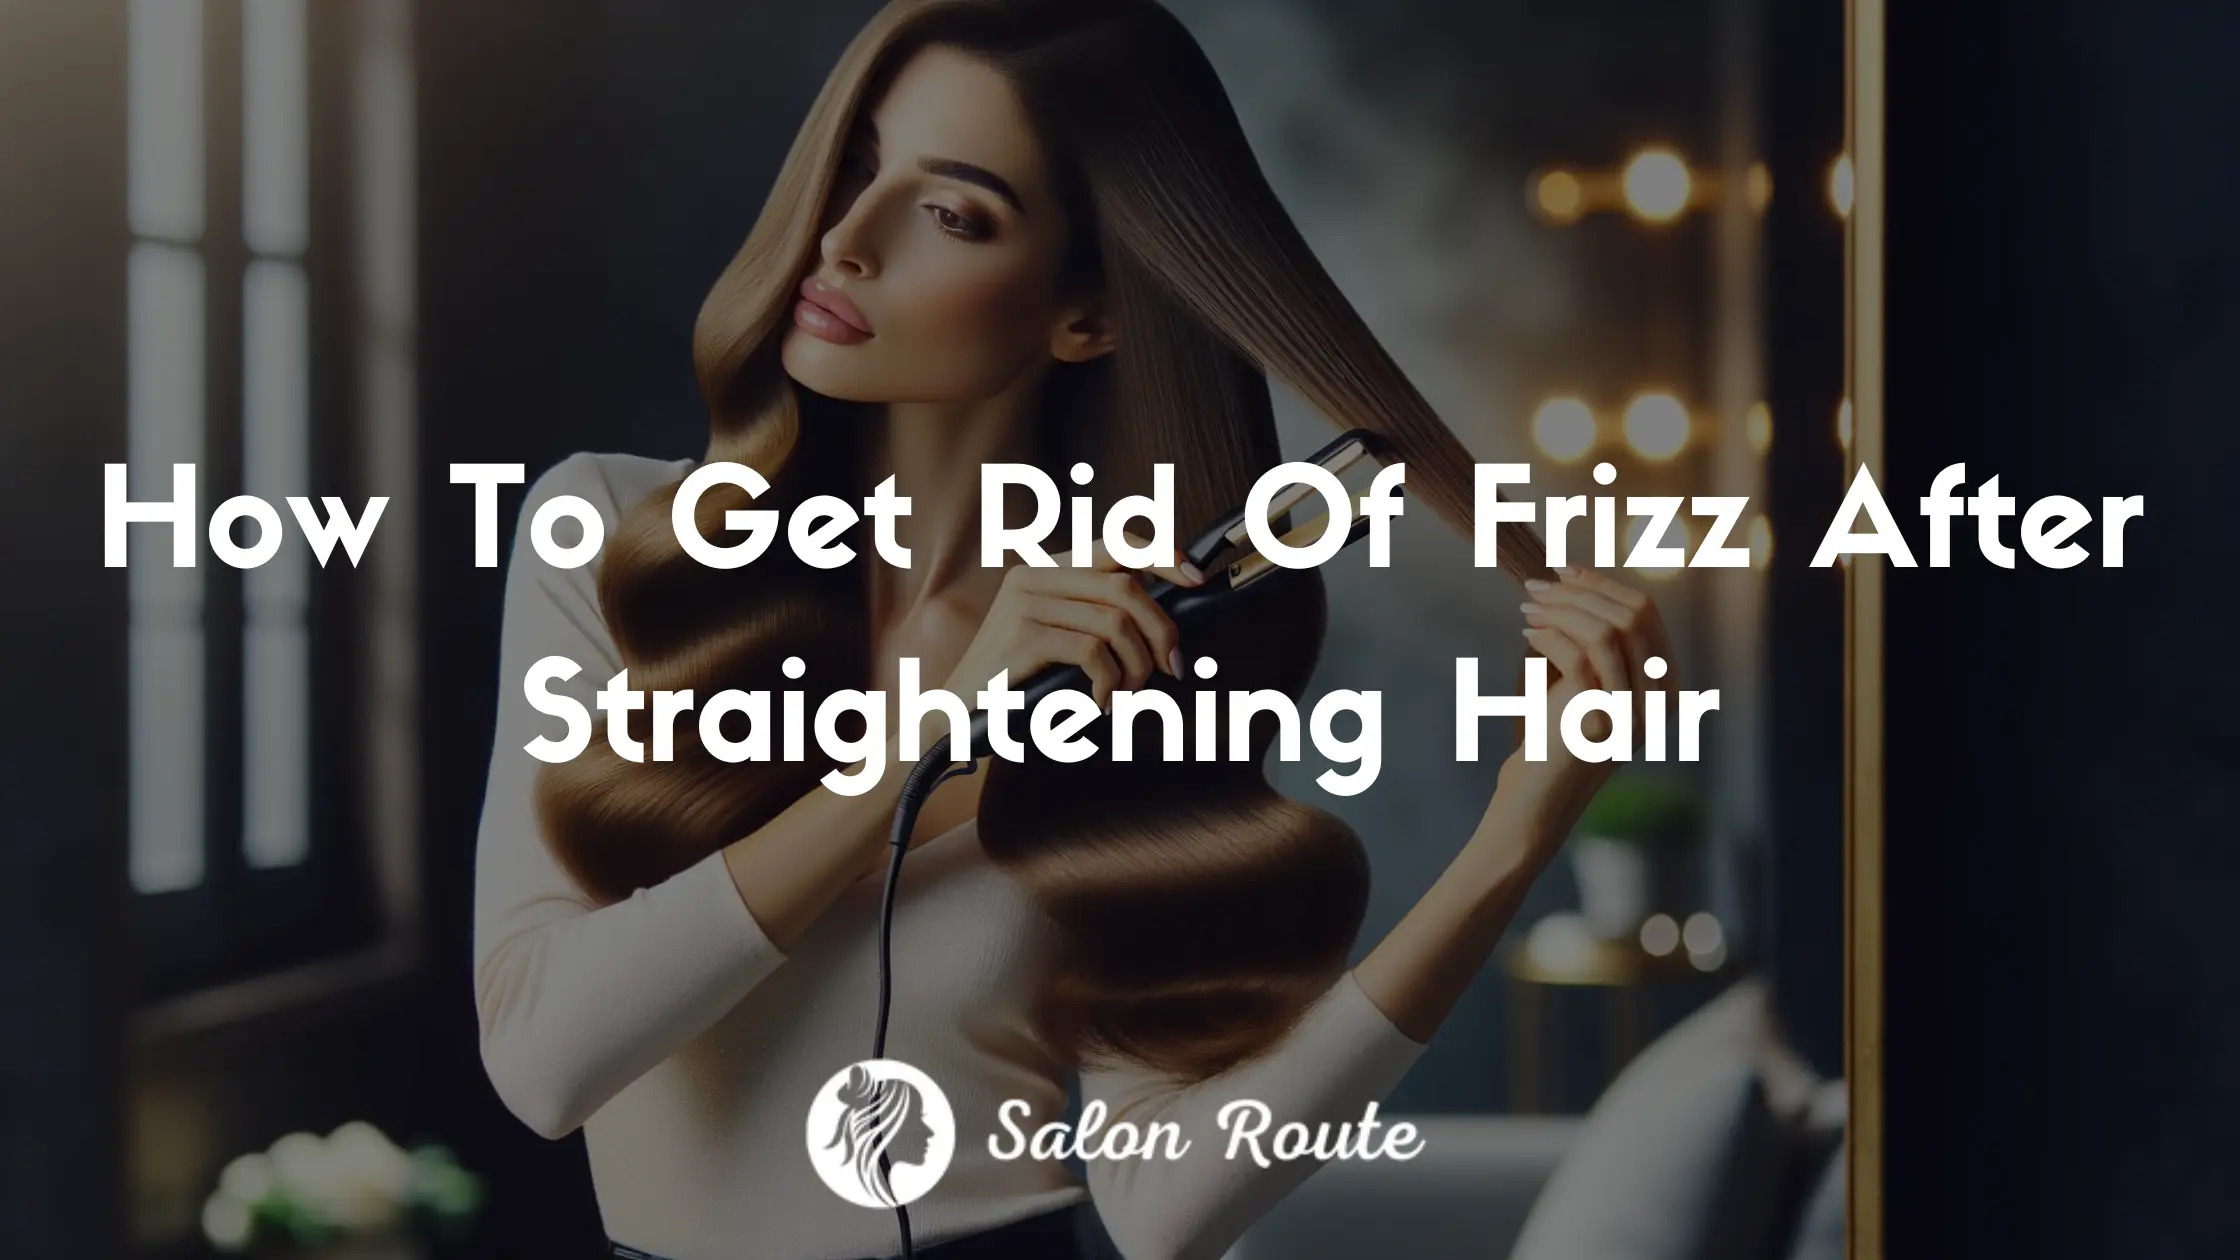 How To Get Rid Of Frizz After Straightening Hair